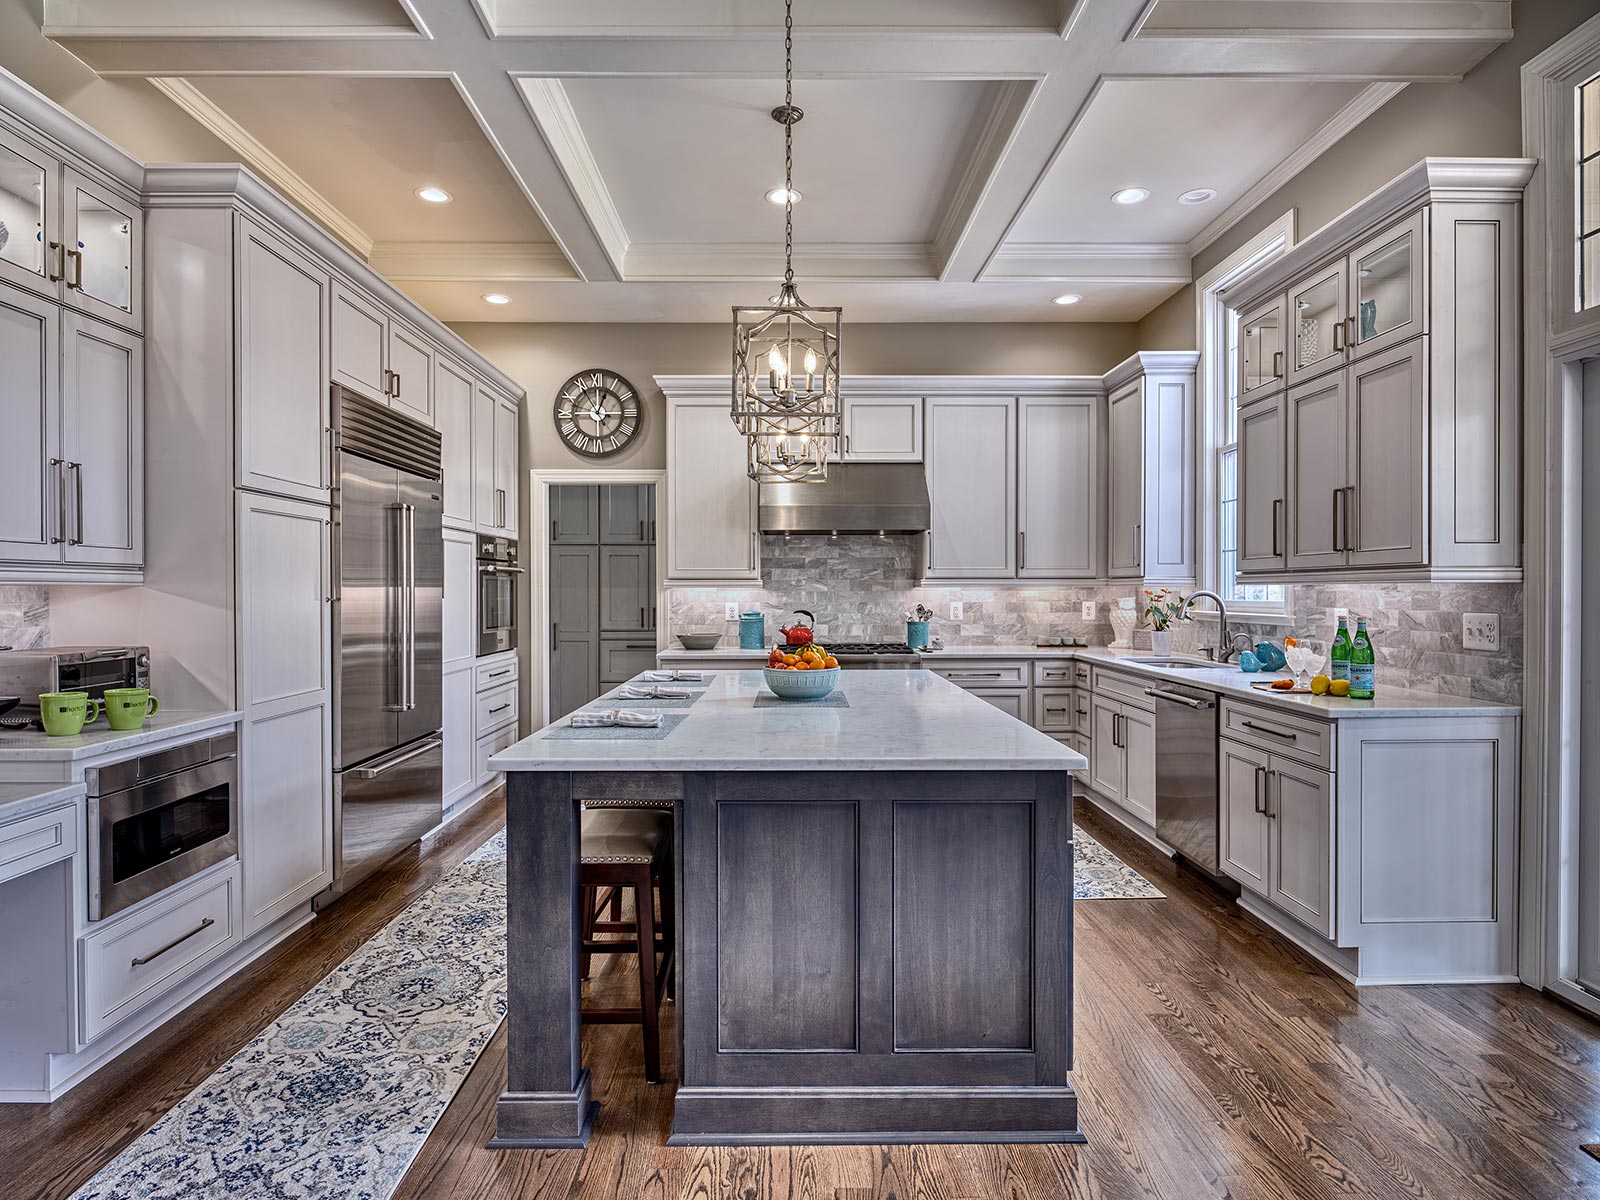 Kitchen cabinet and countertop by The Design House in Hiawatha